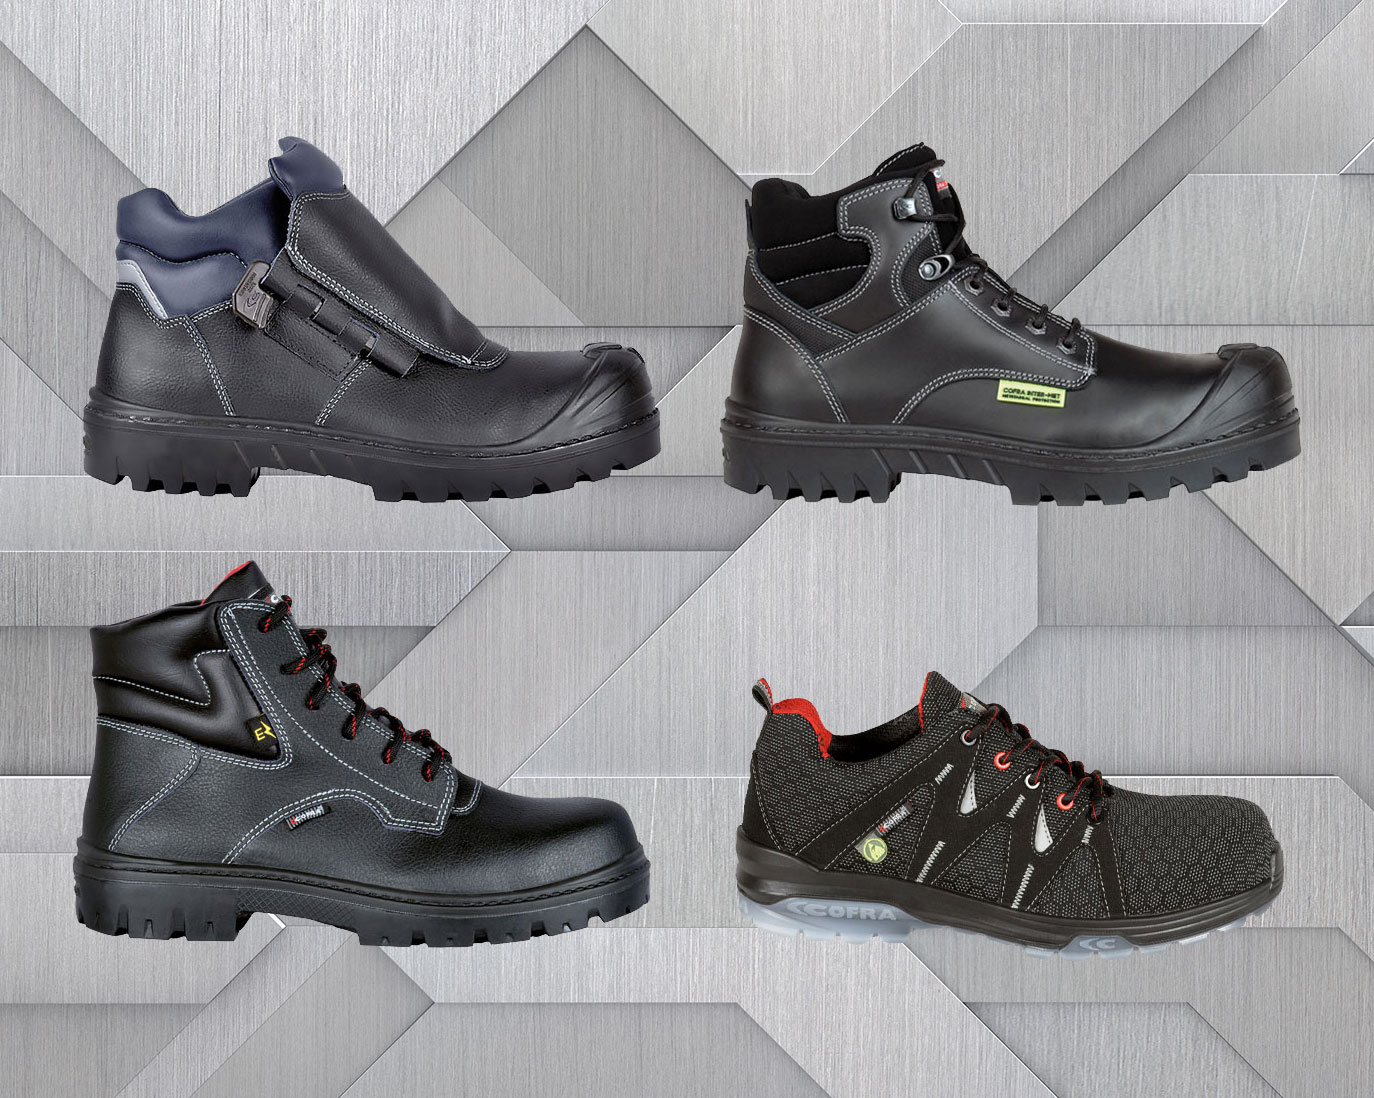 Howsafe| UK Safety footwear, boots, shoes and trainers